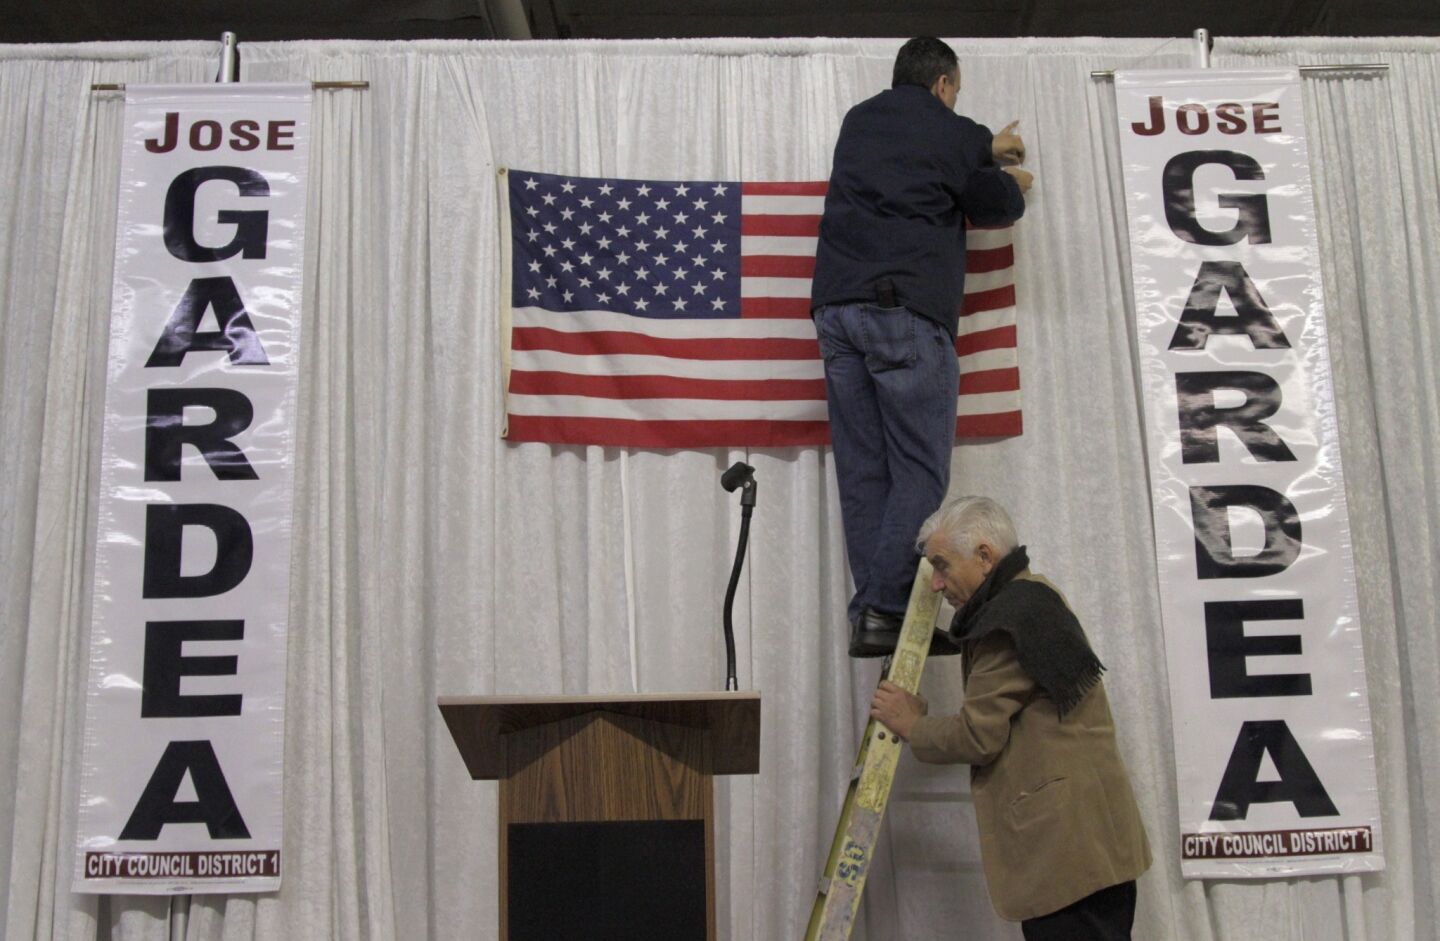 Campaign supporter Eric Ortiz hangs a flag as Guadalupe Davalos steadies the ladder at Jose Gardea's campaign party space in Los Angeles.